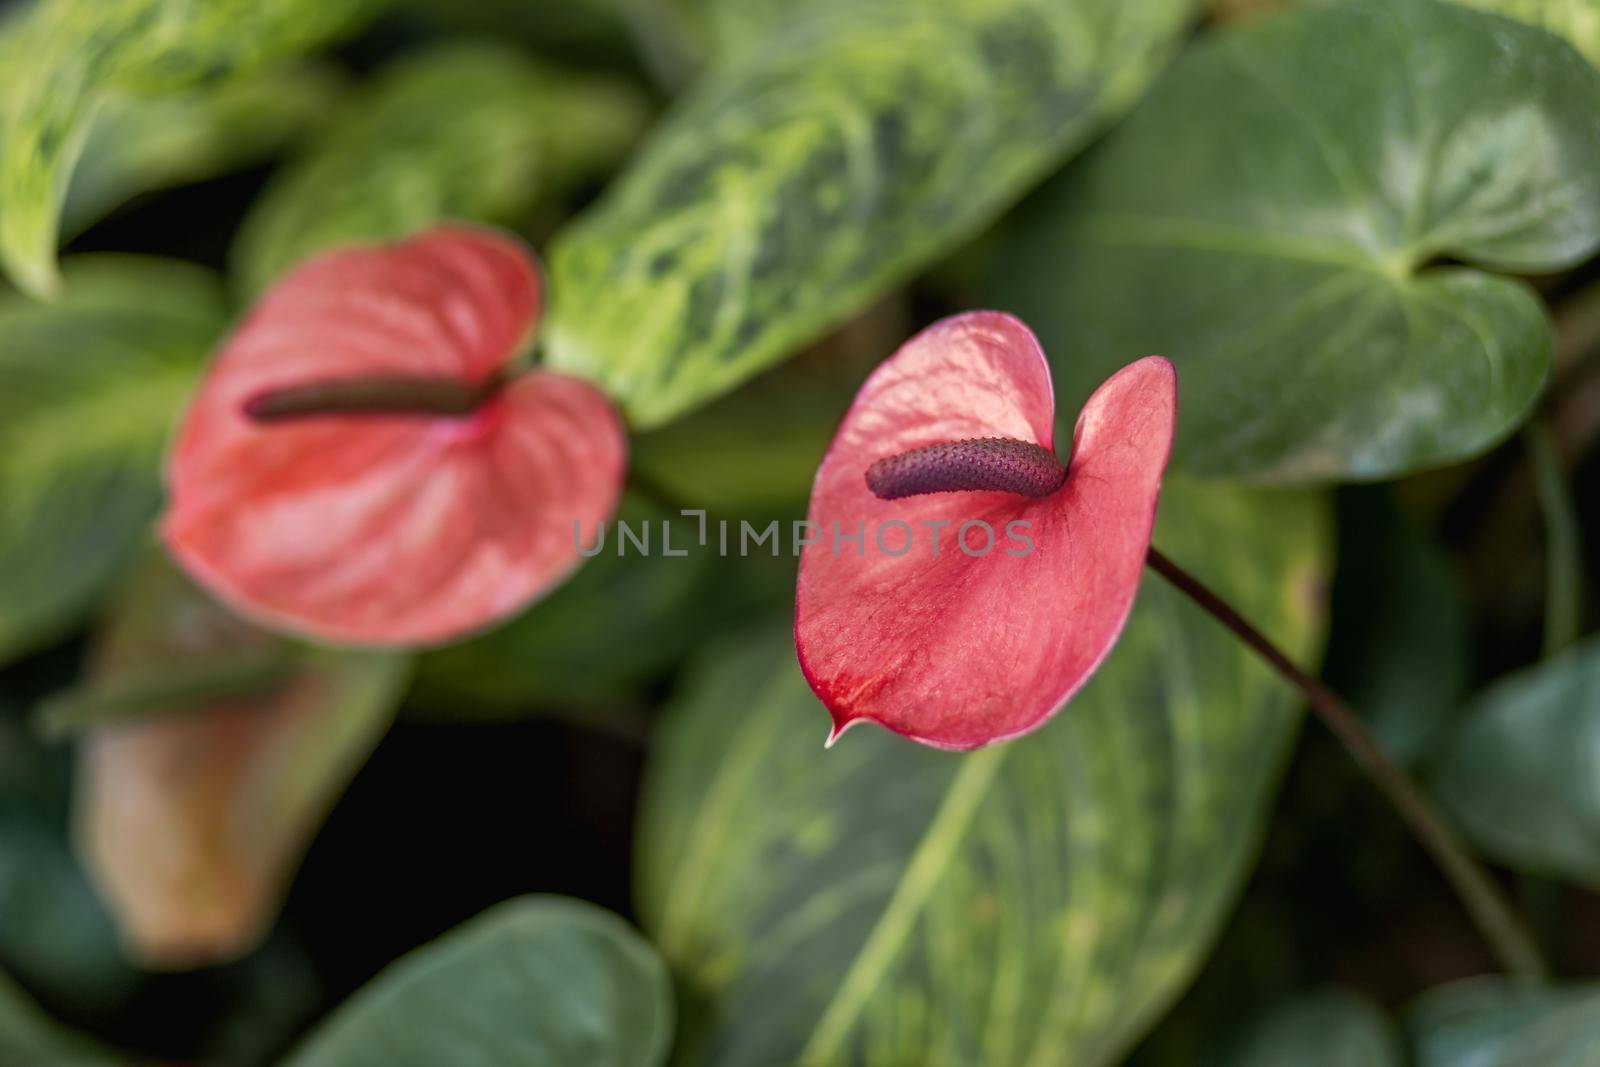 Anthurium andraeanum from Araceae family. Natural background with bright red flowers.